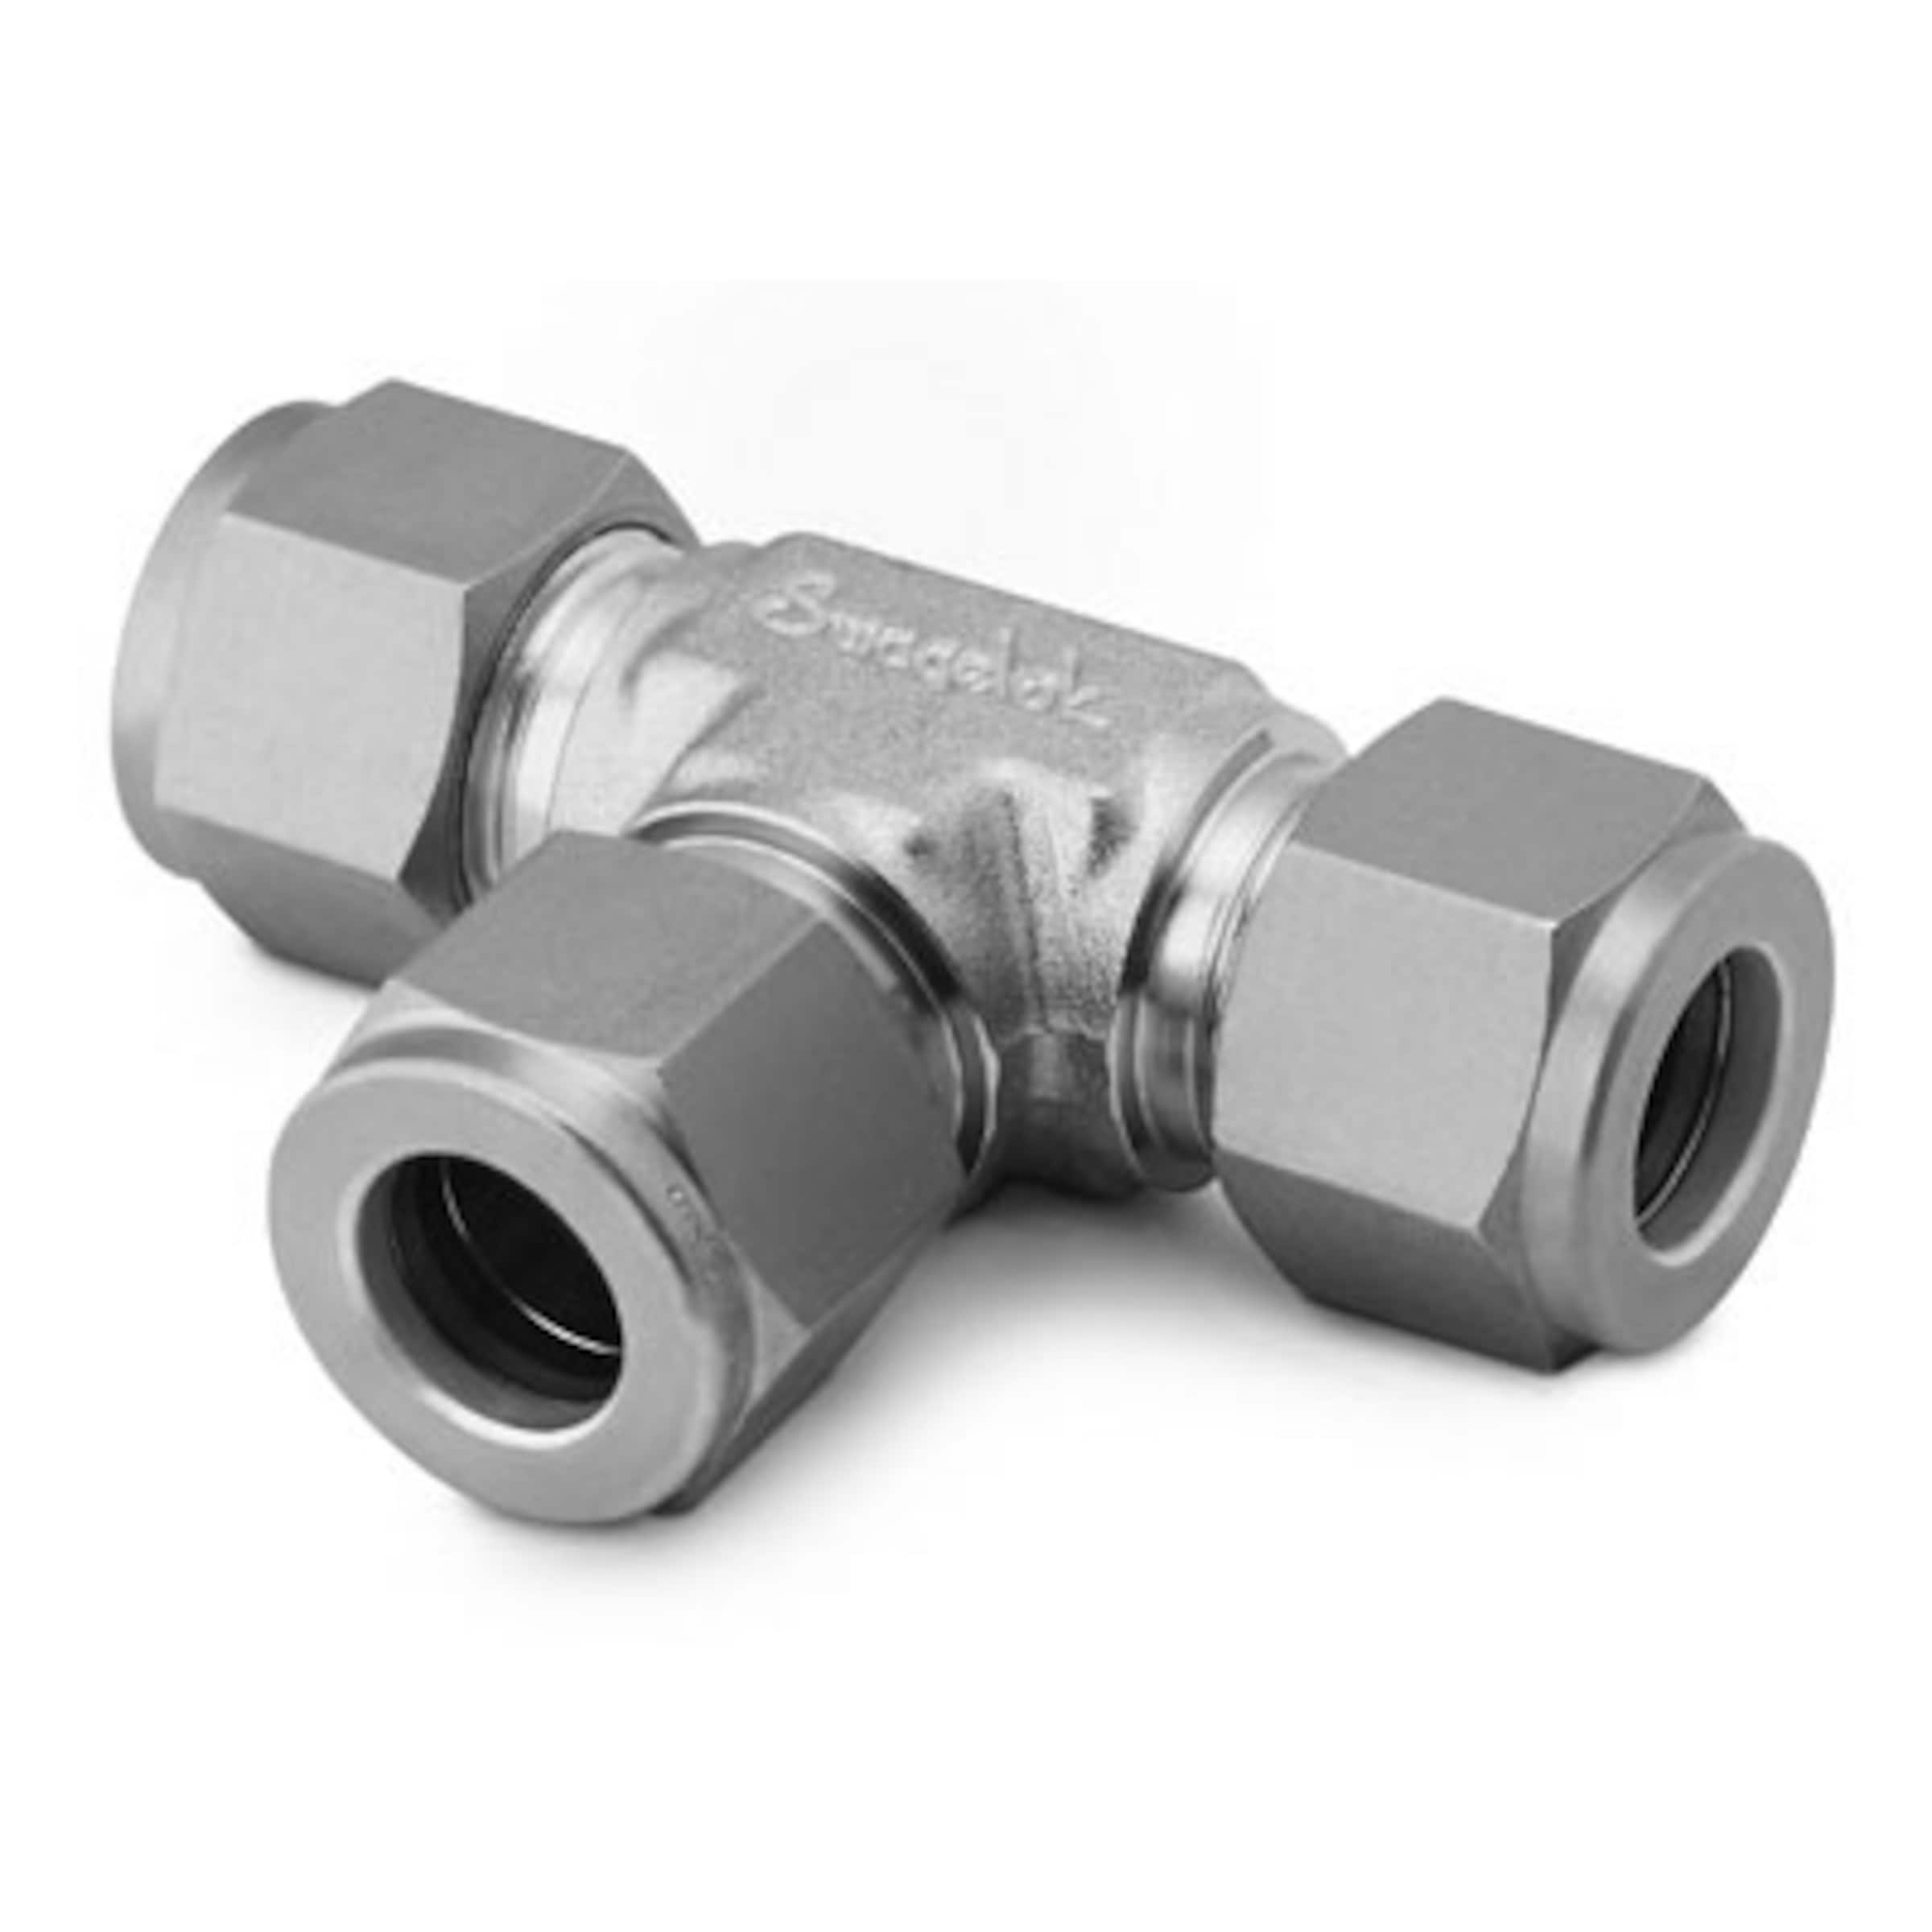 Stainless Steel Compression Tube Fitting, Union, 3/8 Tube OD Straight  Adapter